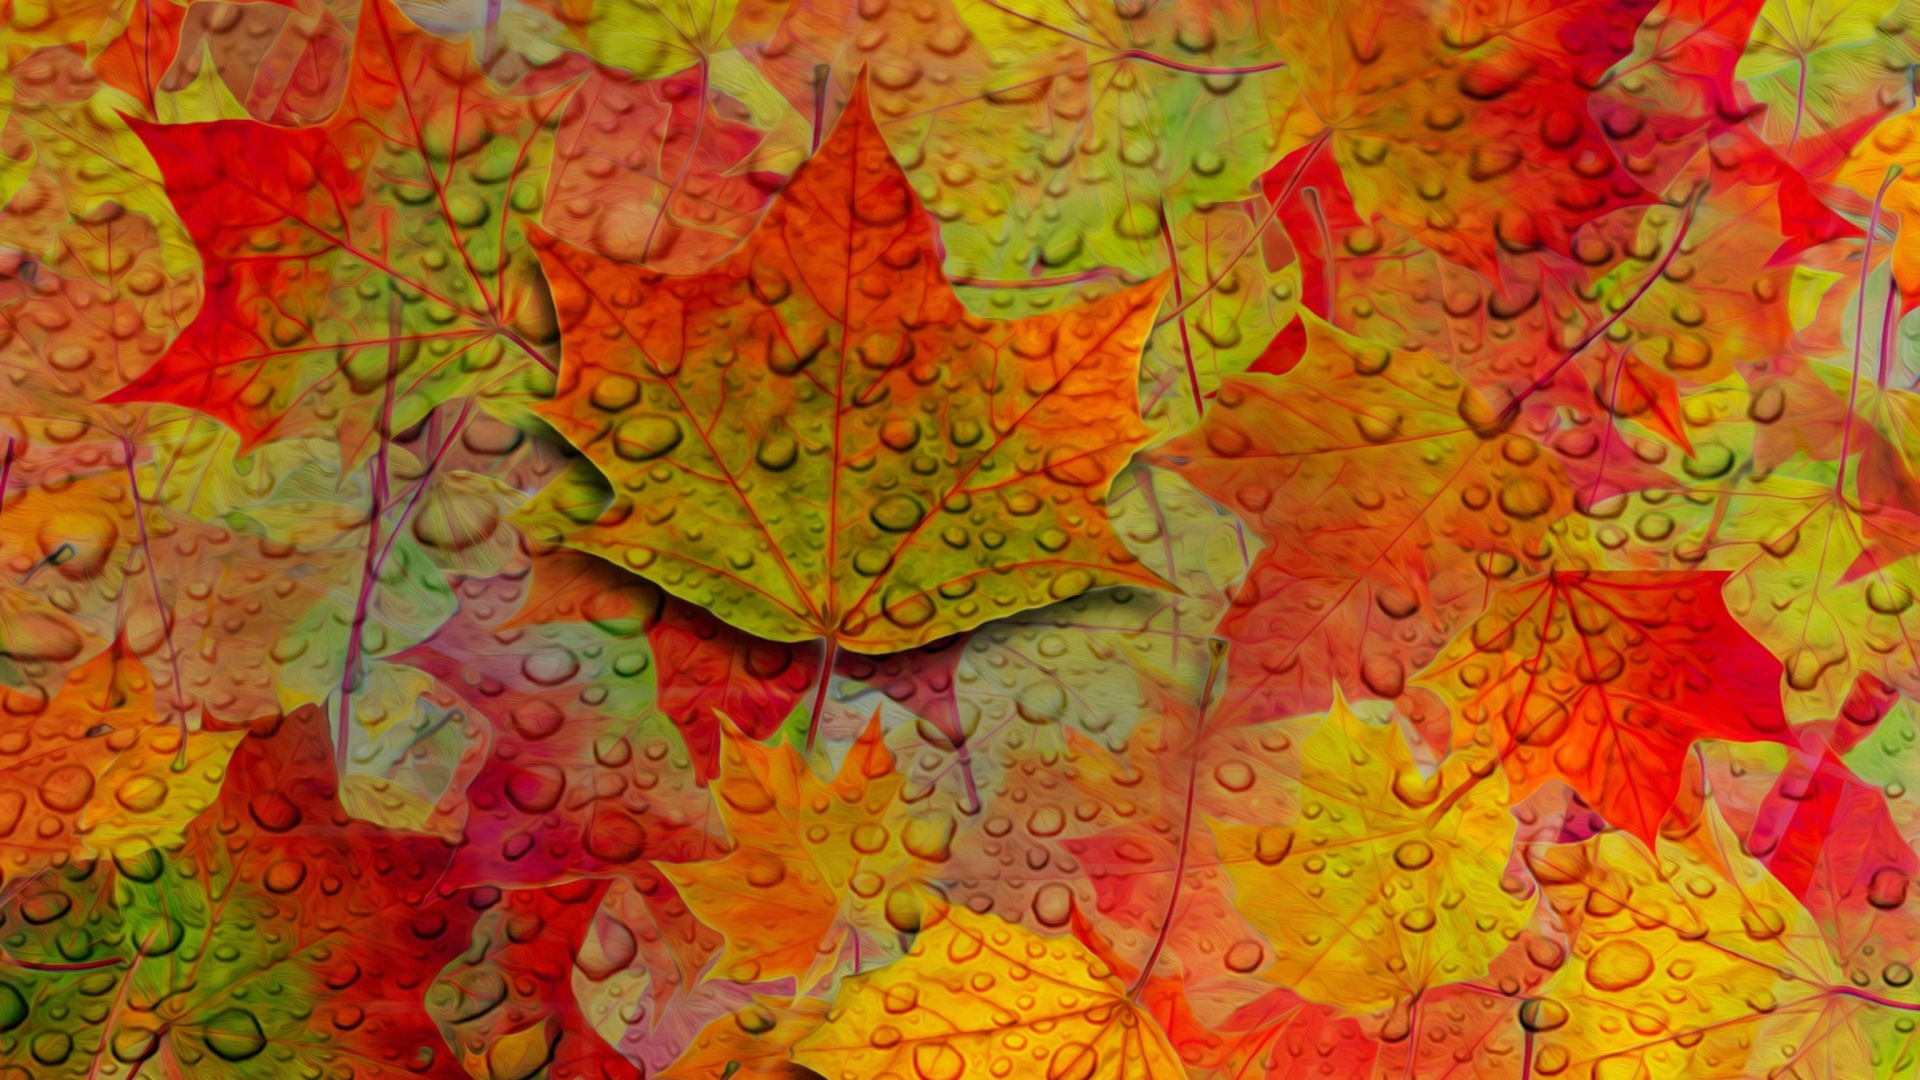 Abstract Fall Leaves wallpaper 1920x1080